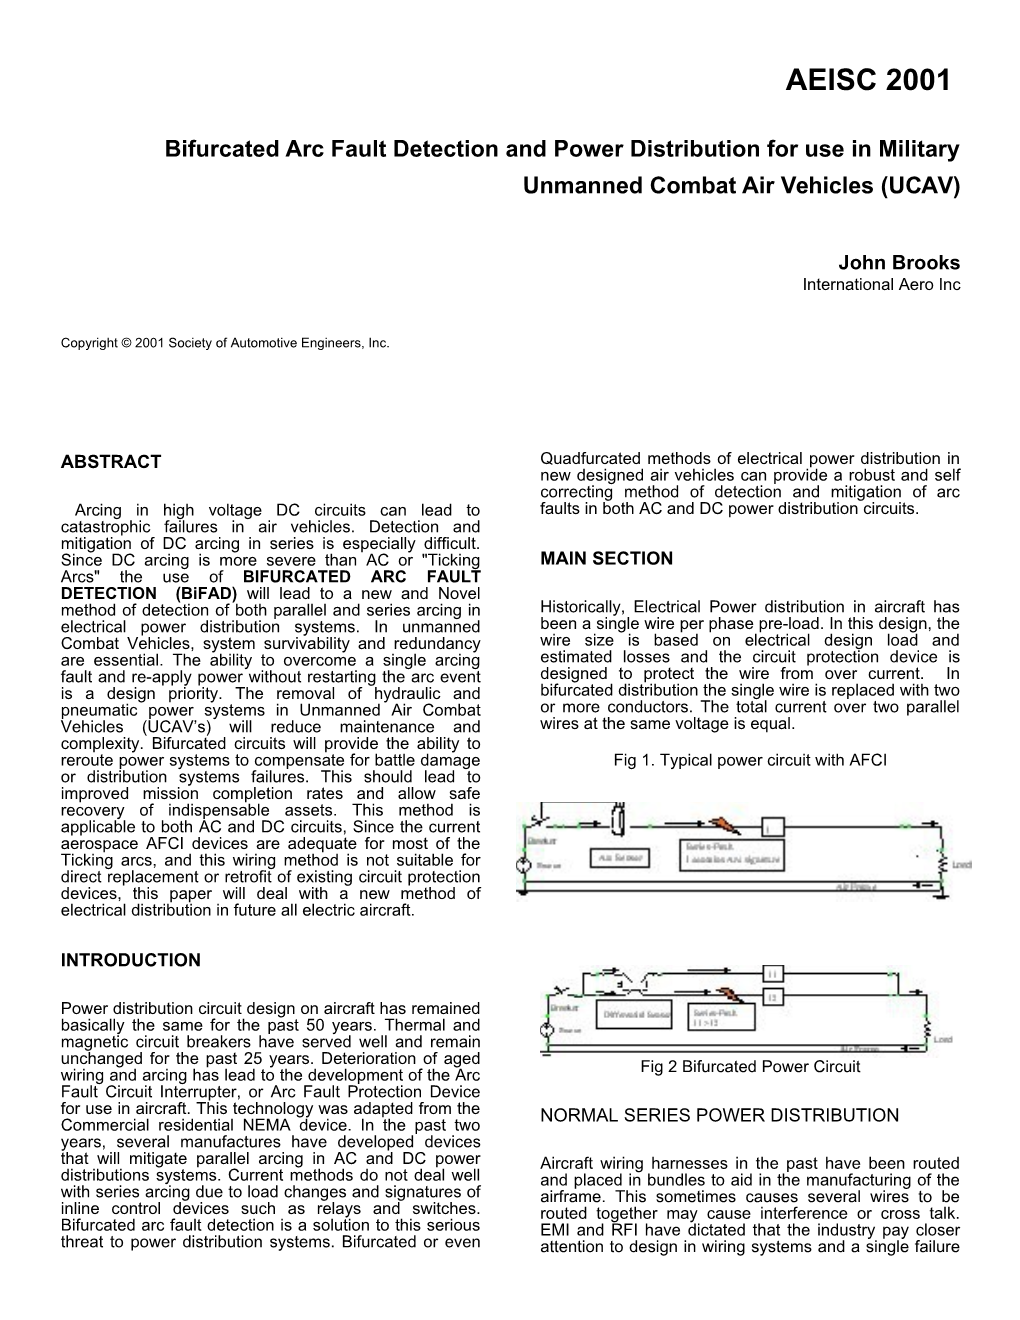 Bifurcated Arc Fault Detection and Power Distribution for Use in Military Unmanned Combat